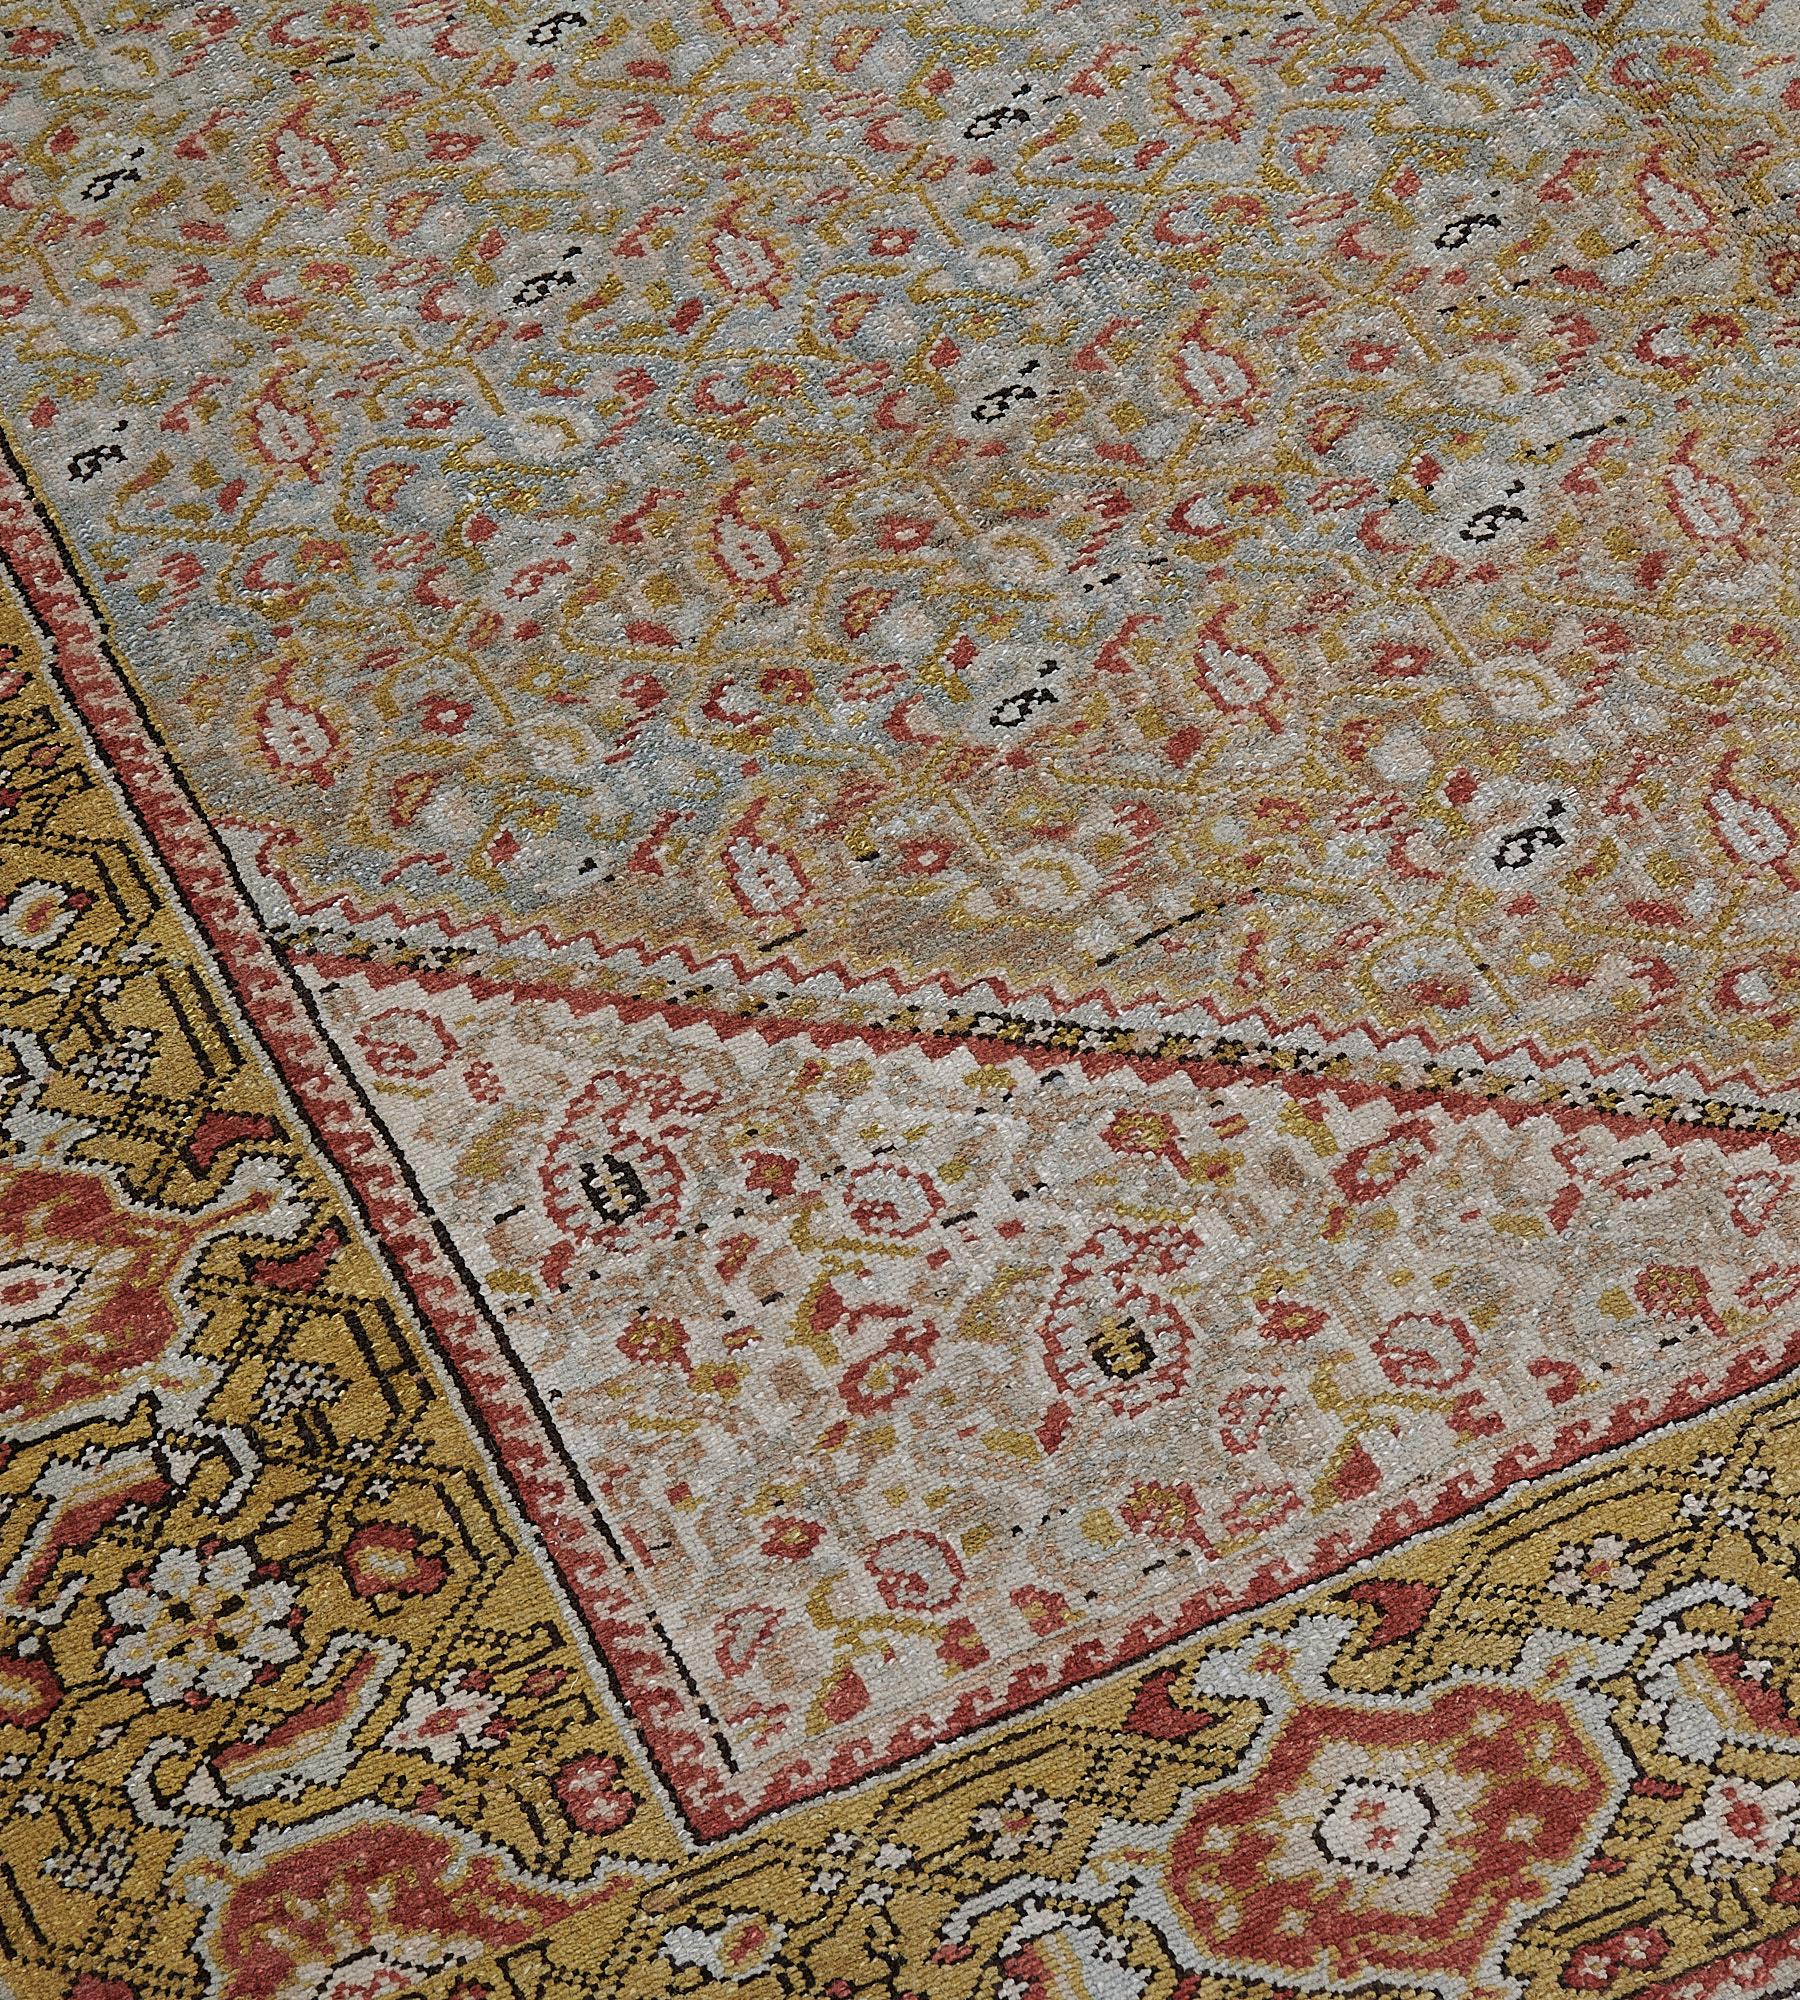 This antique Malayar rug has a shaded mole-grey and light blue field with an overall pistachio-yellow and brick-red herati-pattern, the part lozenge spandrels similar, in a pistachio-yellow border of ivory and brick-red turtle-palmettes linked by an